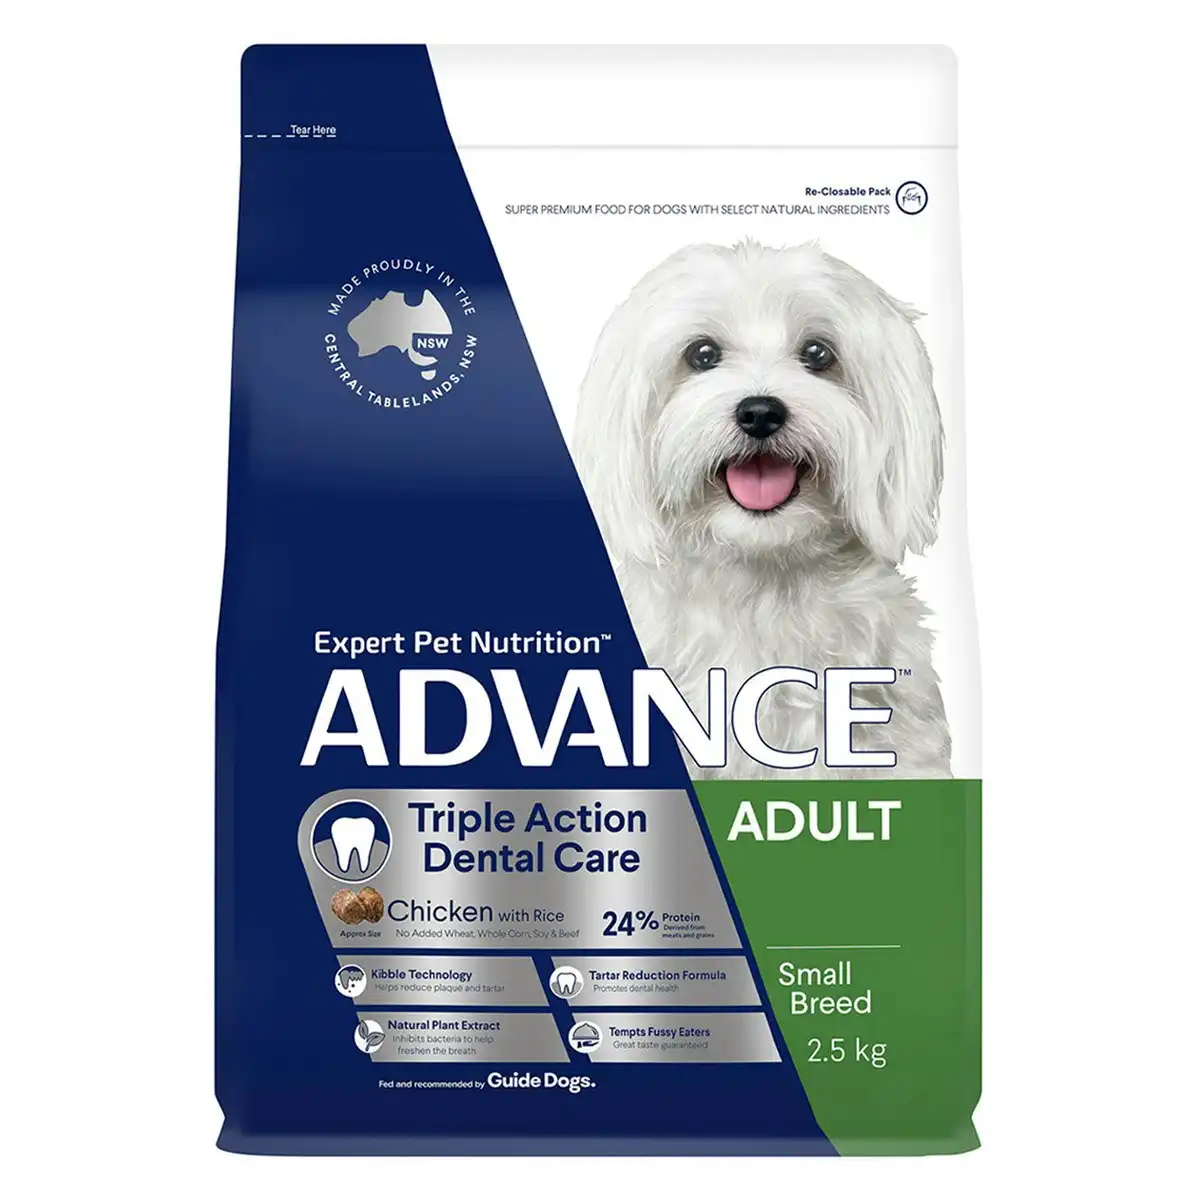 ADVANCE Dental Care Triple Action Adult Small Breed Chicken with Rice Dry Dog Food 2.5 Kg